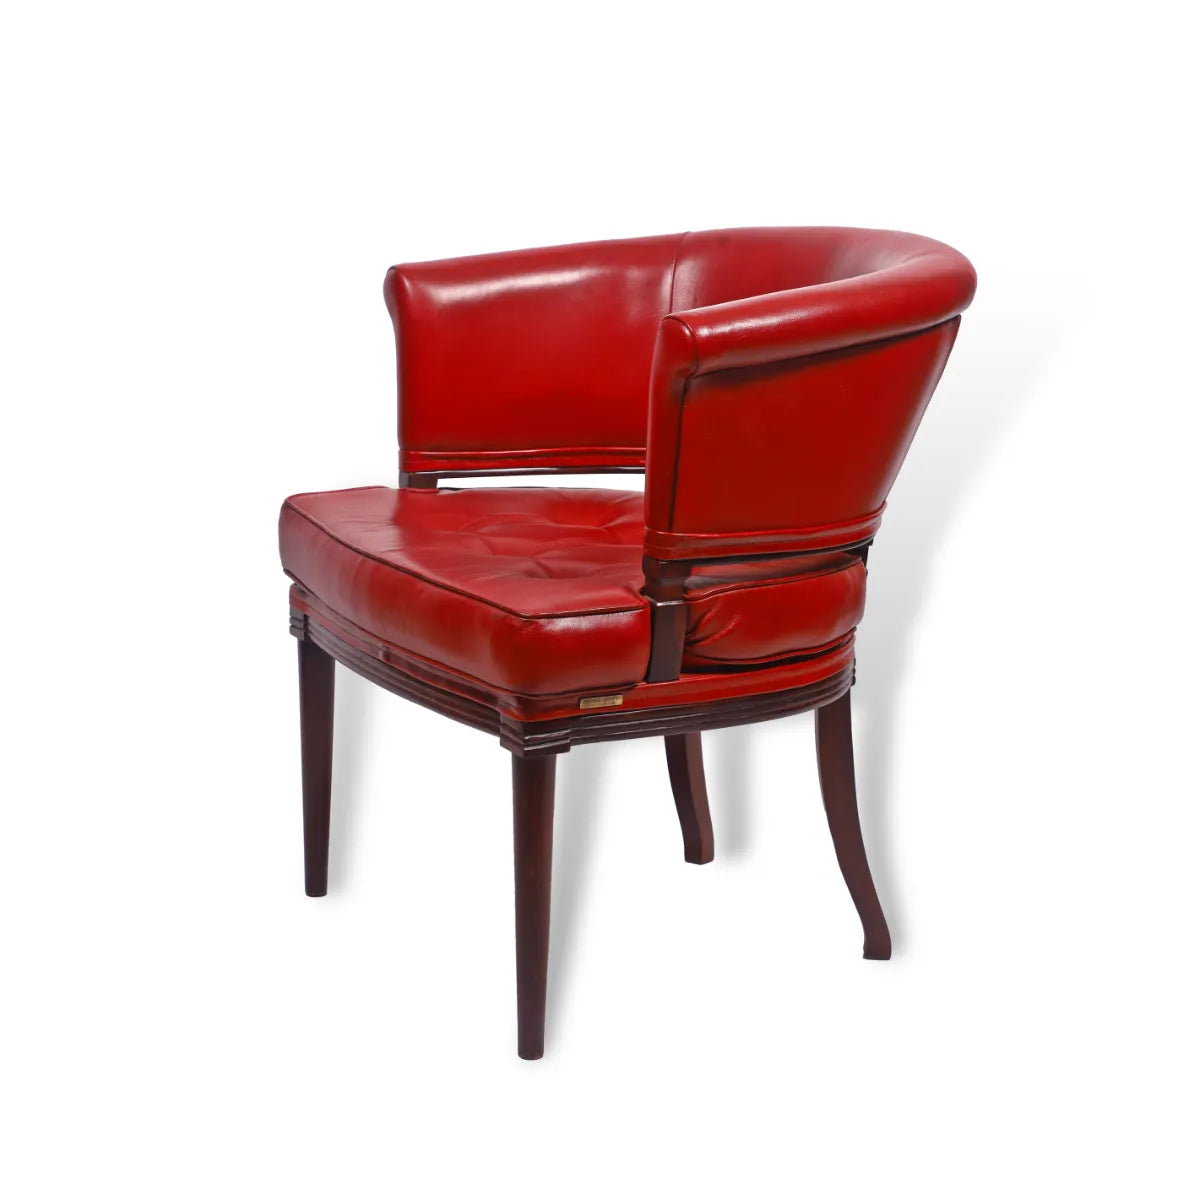 Premium Genuine Leather Chair In Red Colour